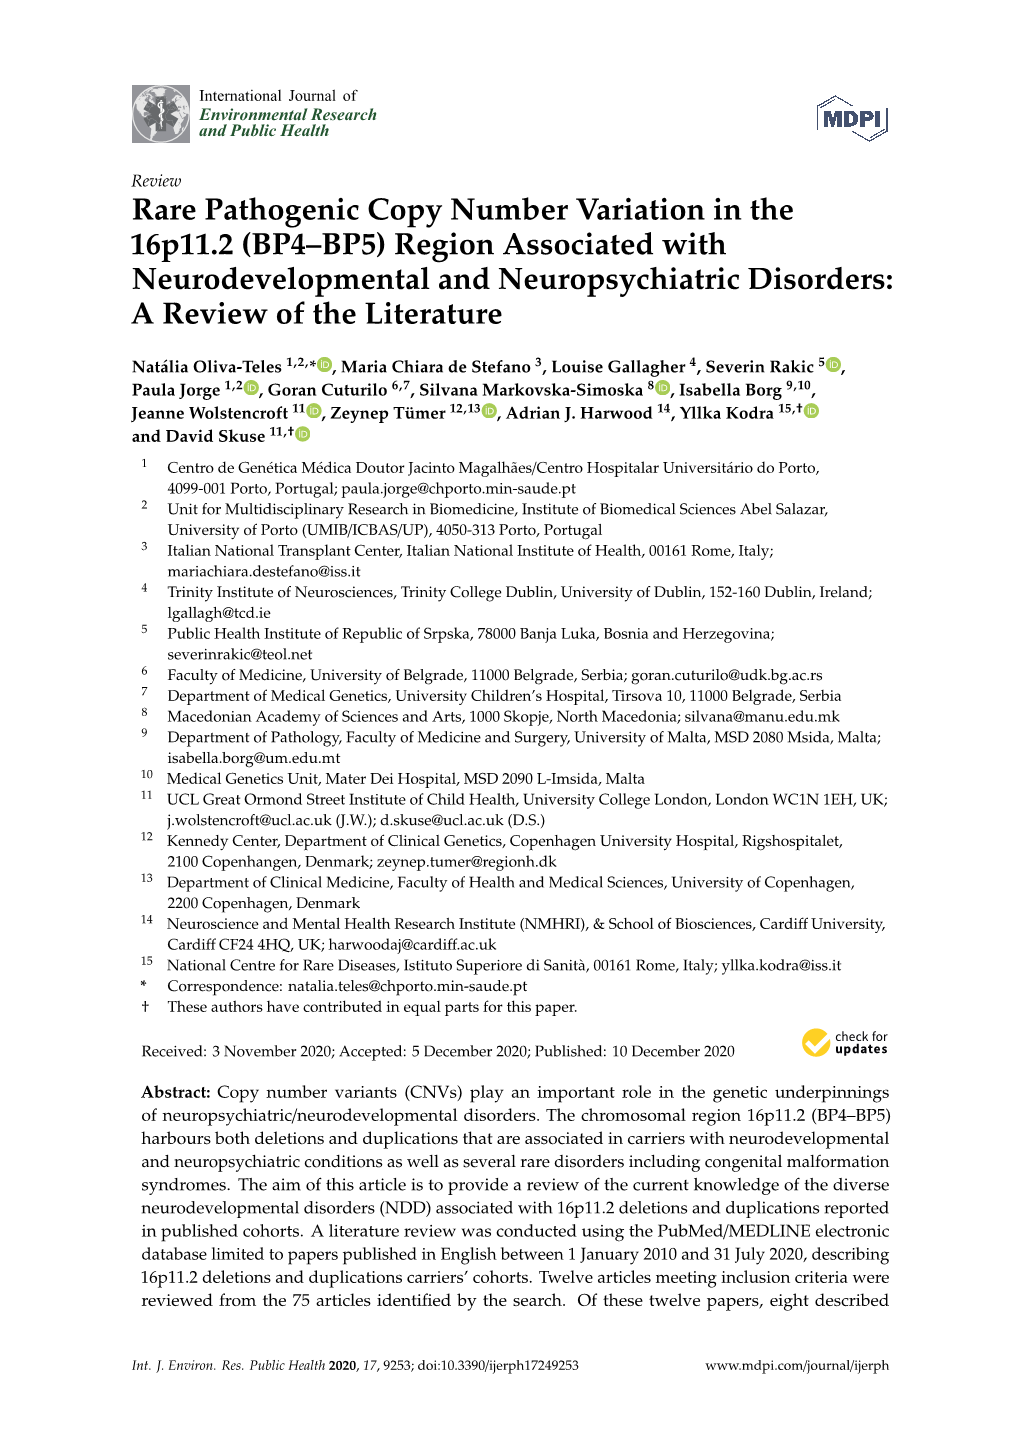 Rare Pathogenic Copy Number Variation in the 16P11.2 (BP4–BP5) Region Associated with Neurodevelopmental and Neuropsychiatric Disorders: a Review of the Literature